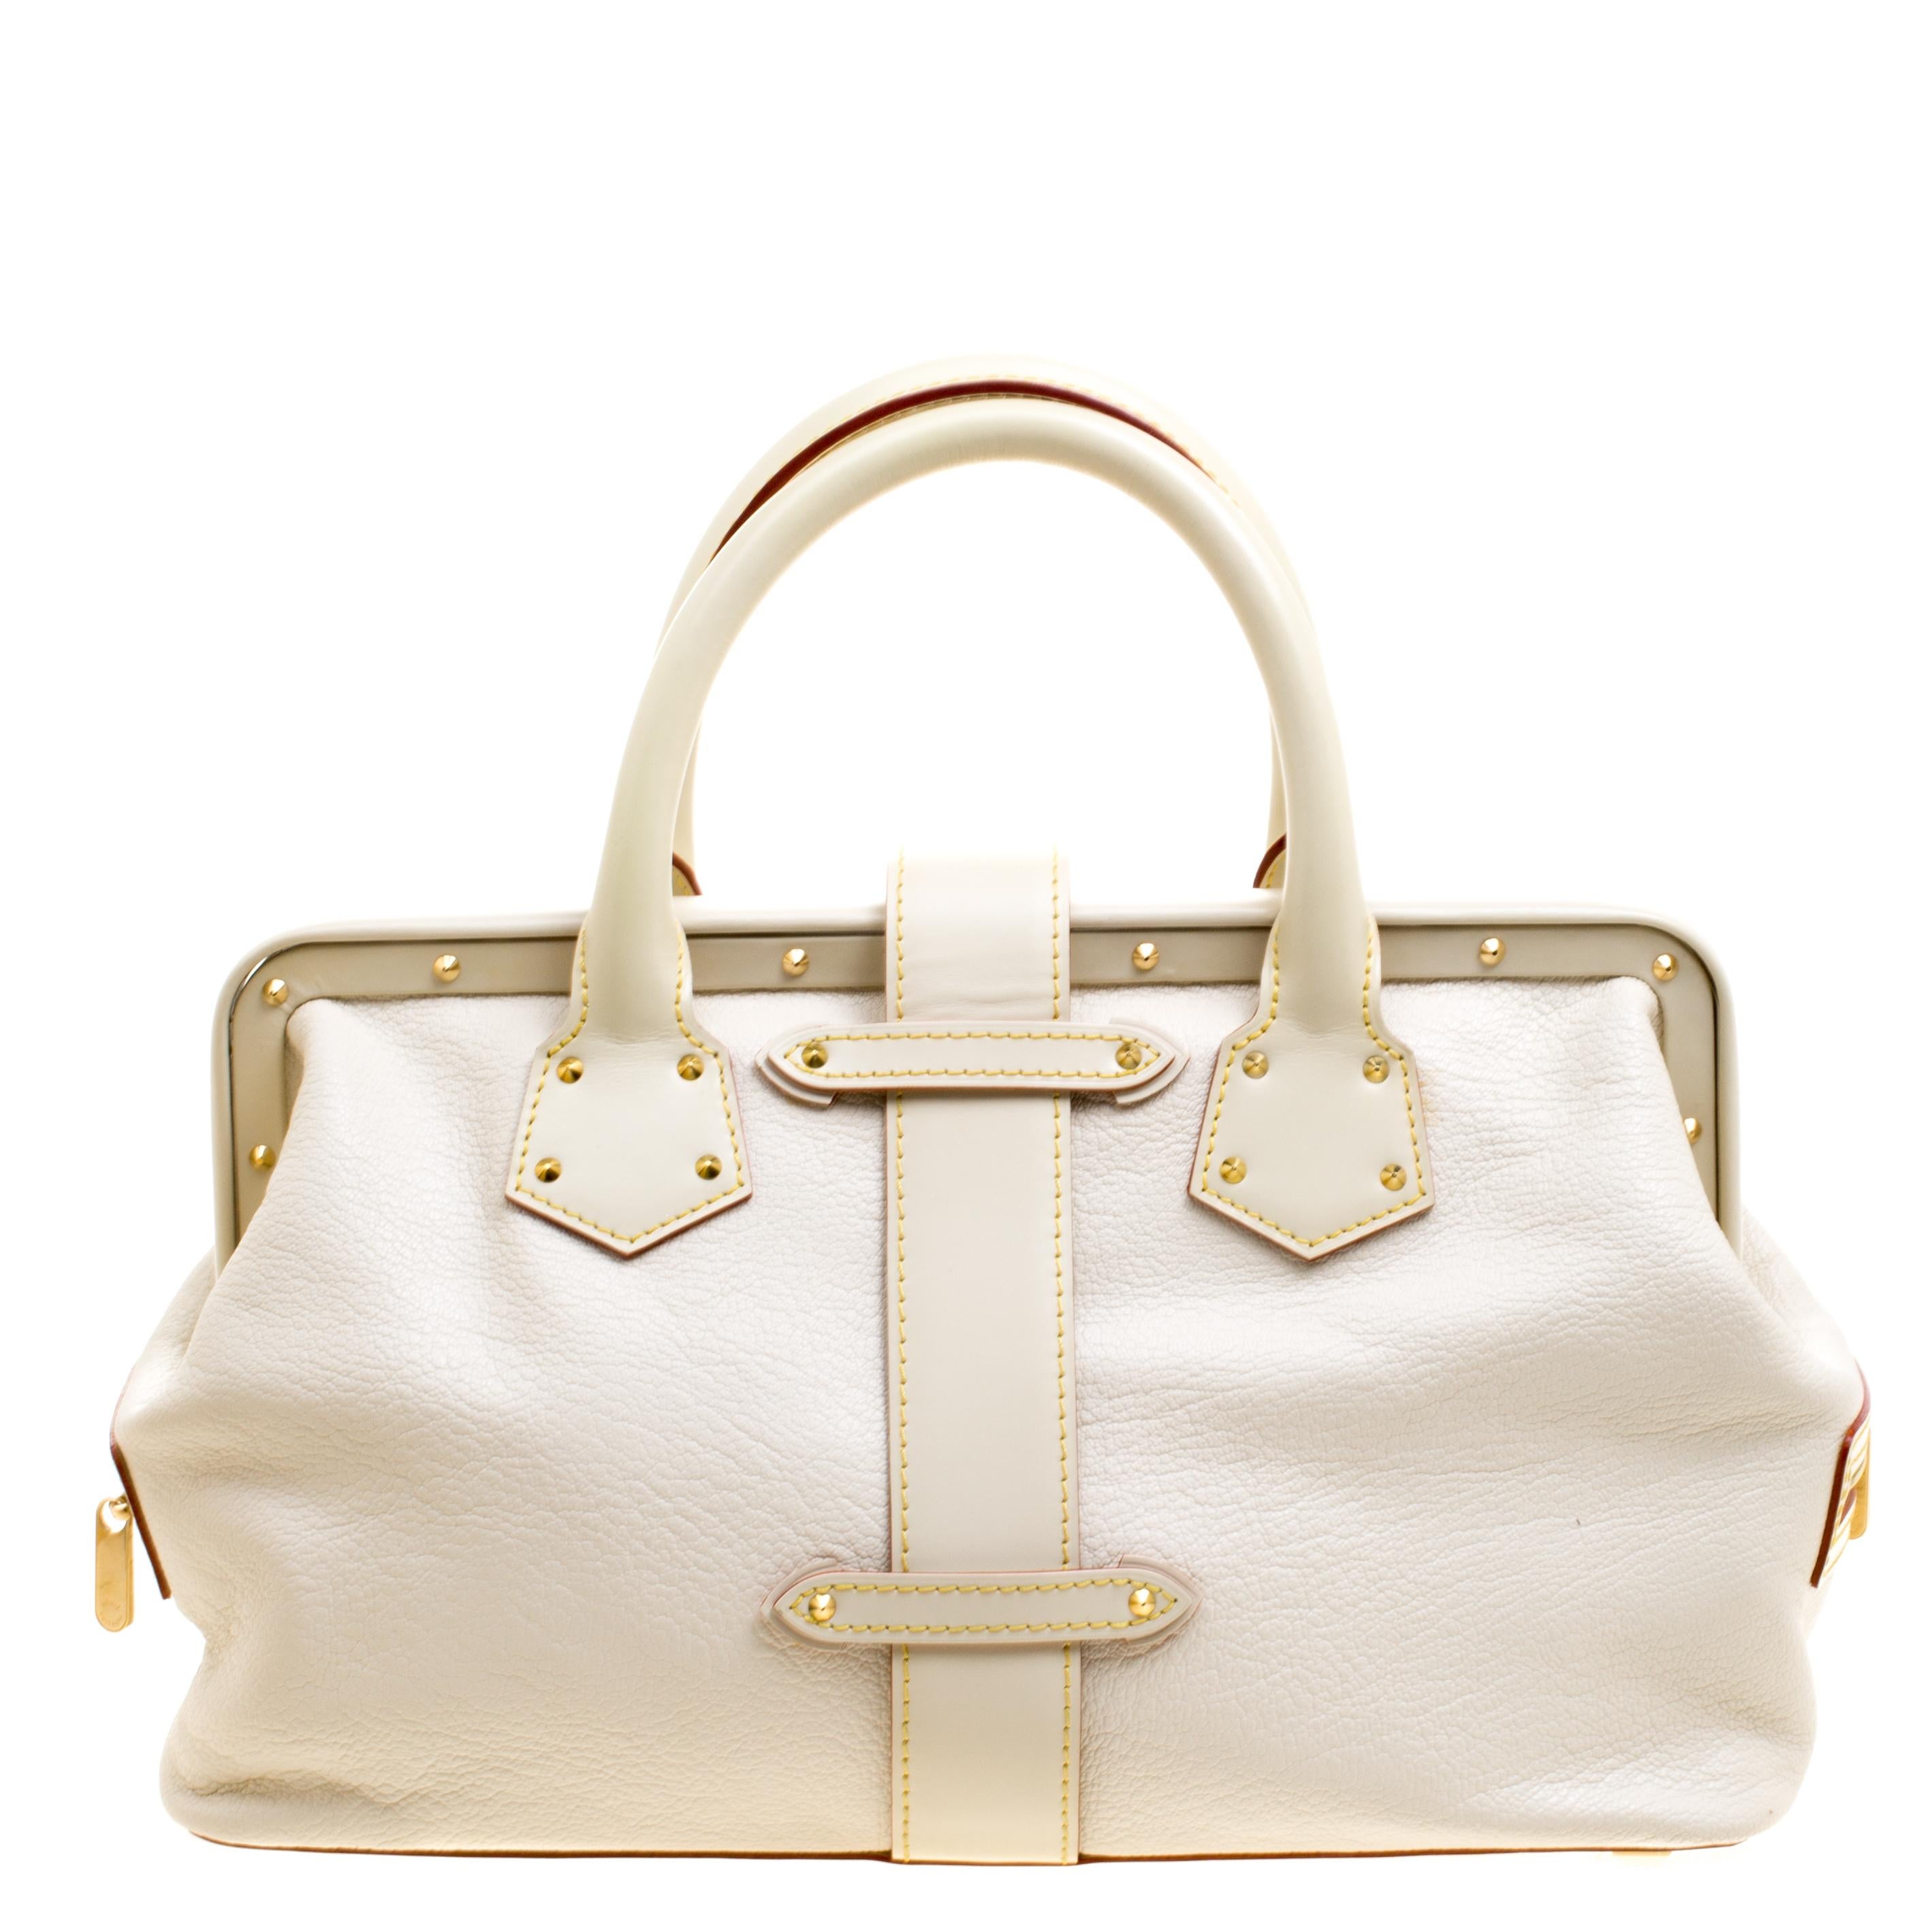 This posh L'Ingenieux PM Bag from Louis Vuitton is shaped in a stunning white Suhali leather and detailed with gorgeous gold-tone accents that lend it an elegant look. It features two rolled top handles, a sturdy top and protective base studs that